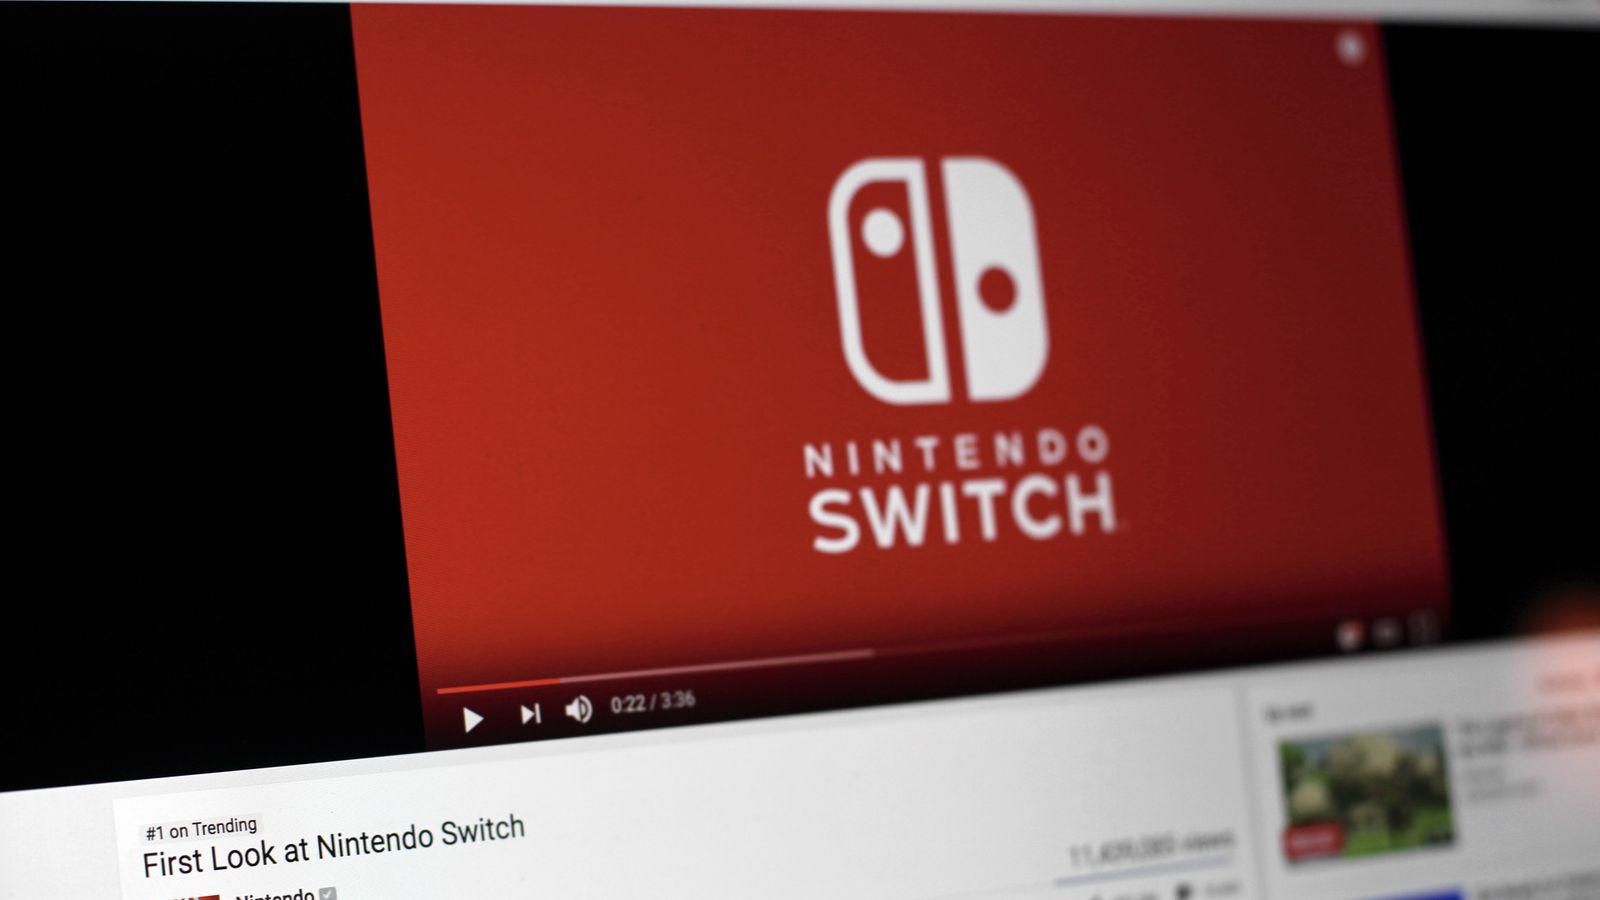 The Nintendo Switch reveal is the most viewed video on